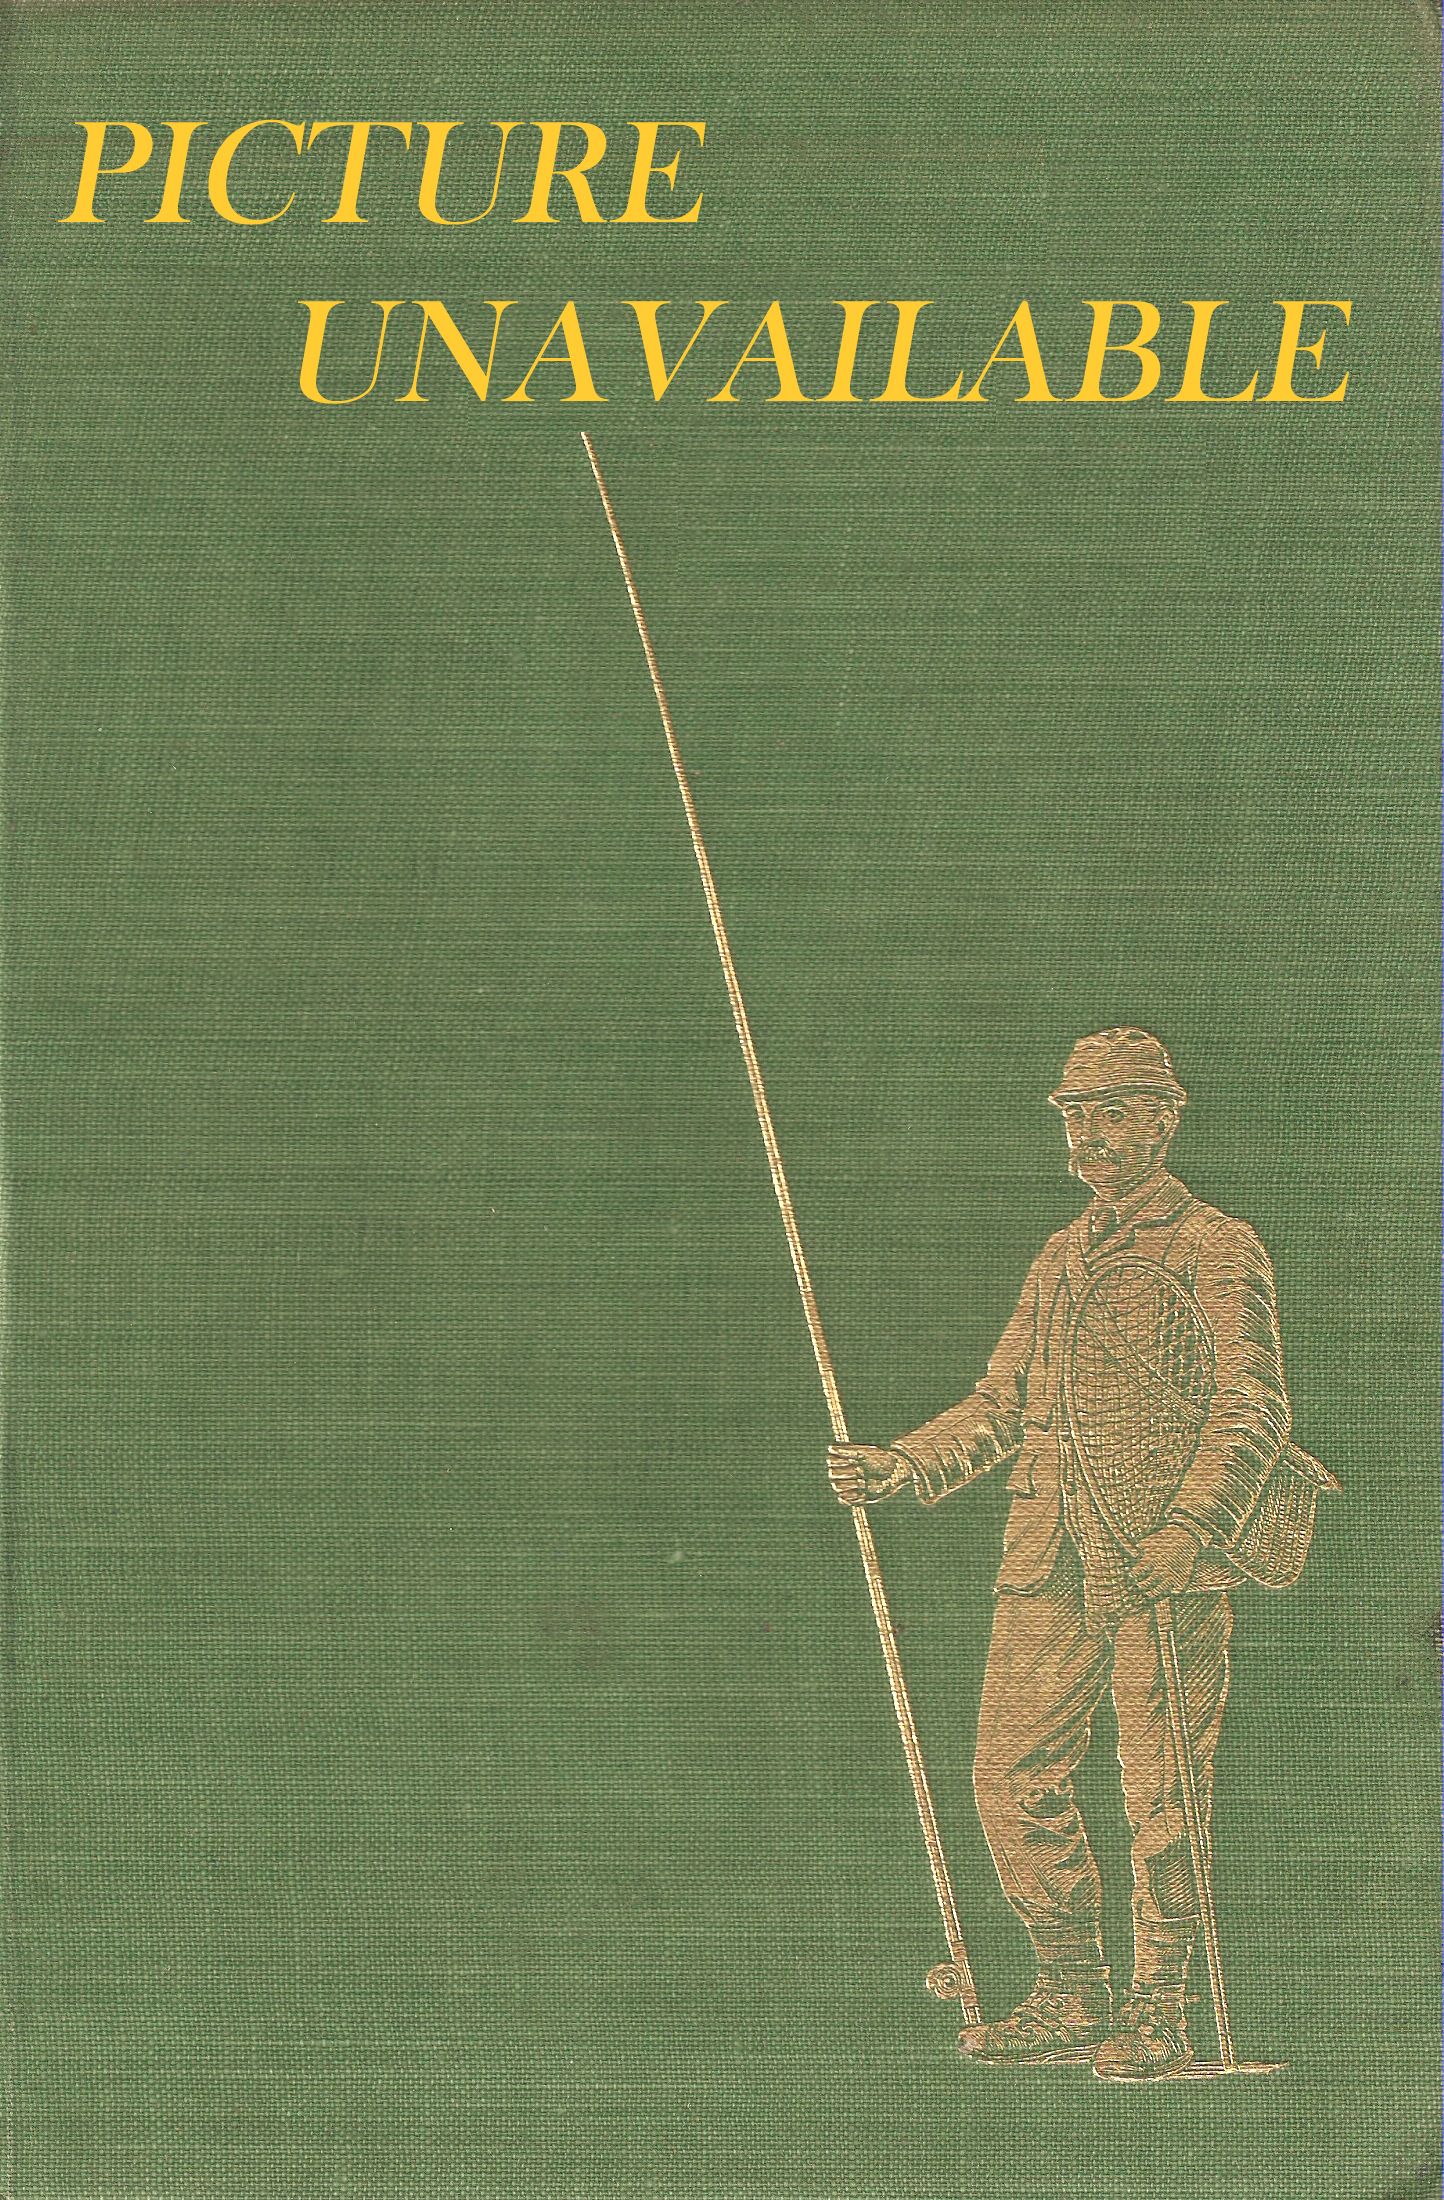 FALKUS and BULLER'S FRESHWATER FISHING. A book of tackles and techniques,  with some notes on various fish, fish recipes, fishing safety and sundry  other matters. By Fred Buller and Hugh Falkus. First edition.